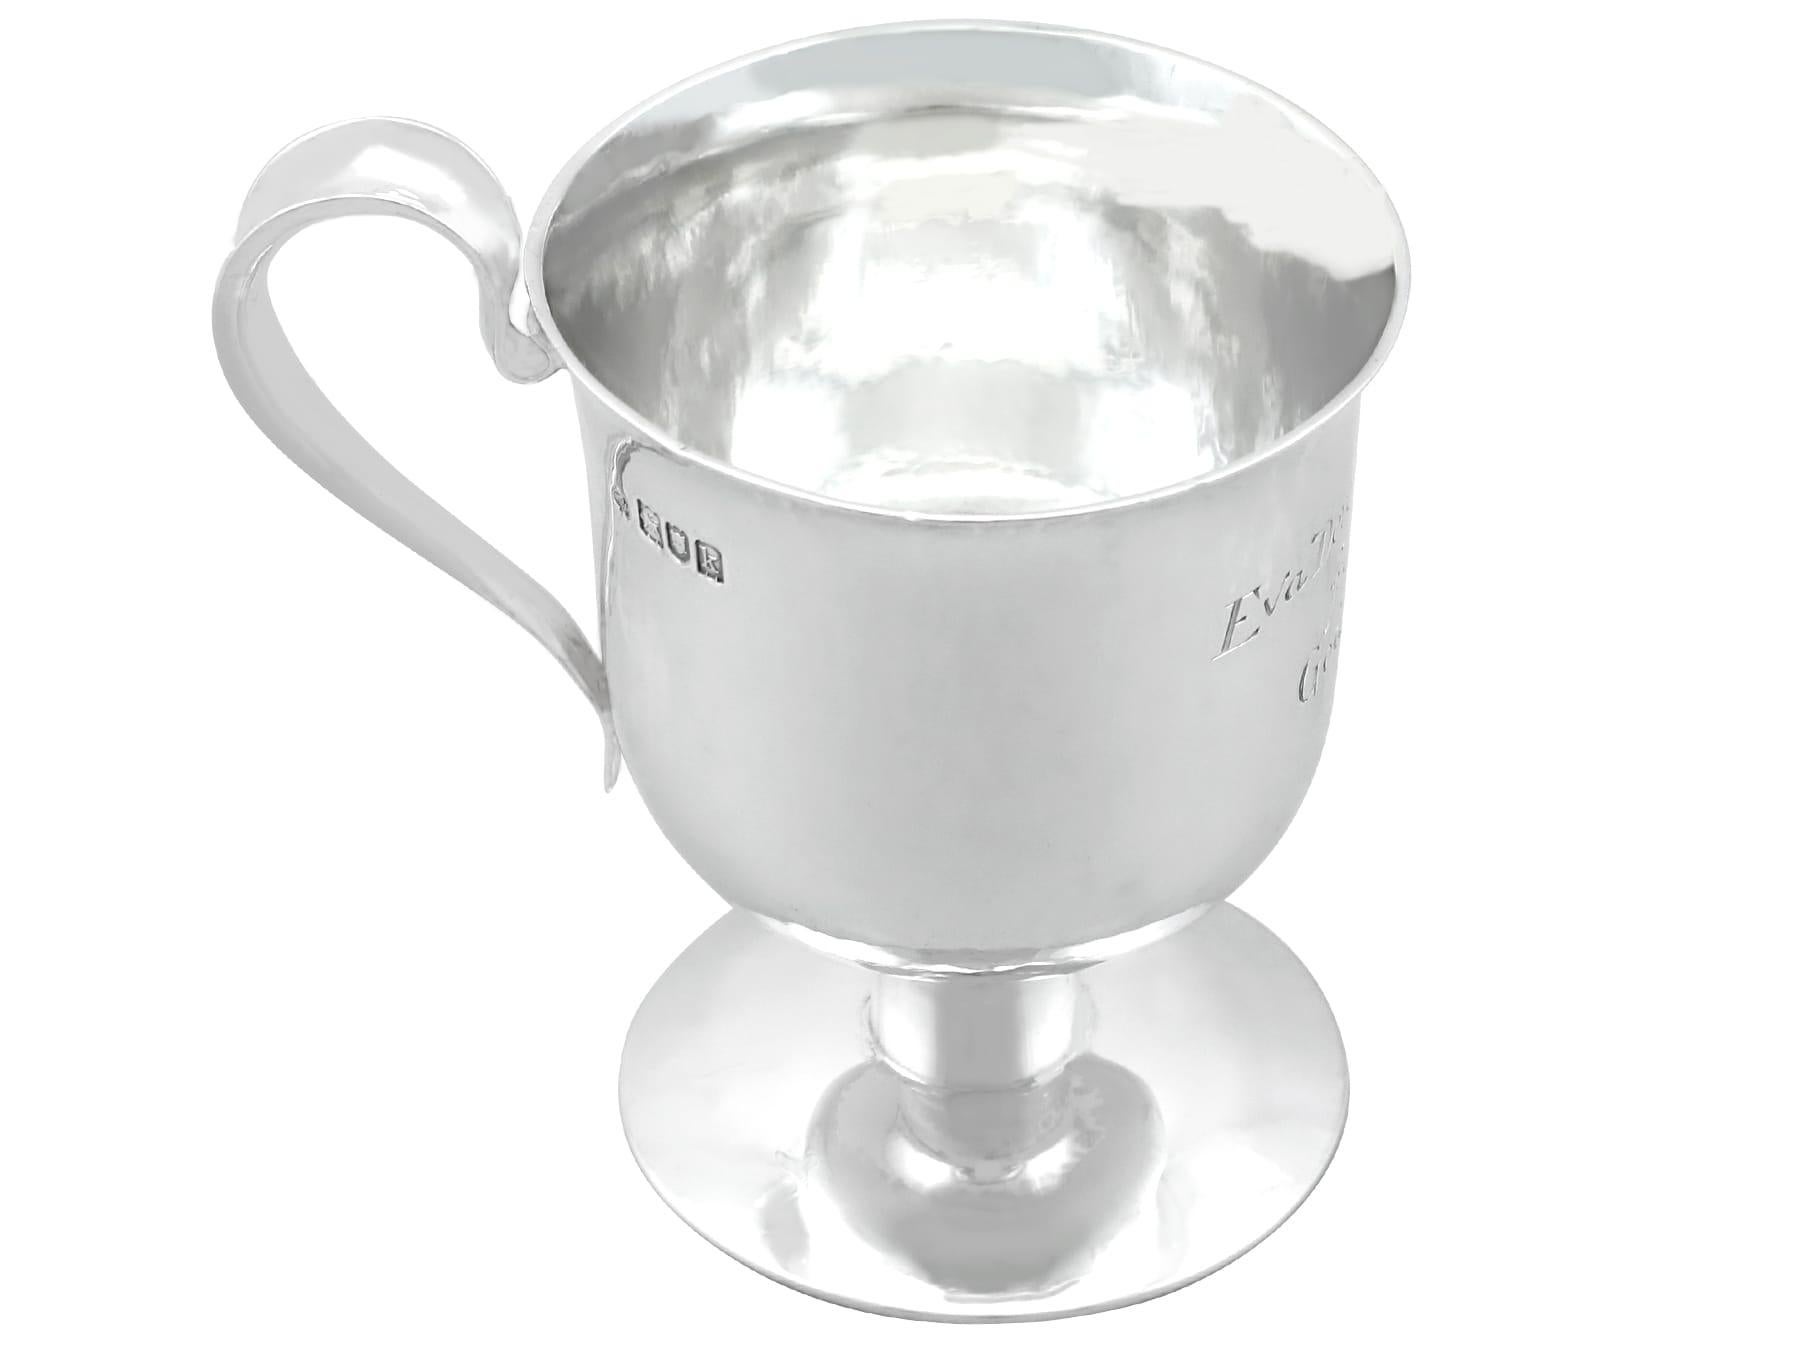 A fine and impressive antique Edwardian English sterling silver christening mug in the Arts & Crafts style; an addition to our wine and drinks related silverware collection.

This fine antique Edwardian sterling silver mug has a plain bell-shaped